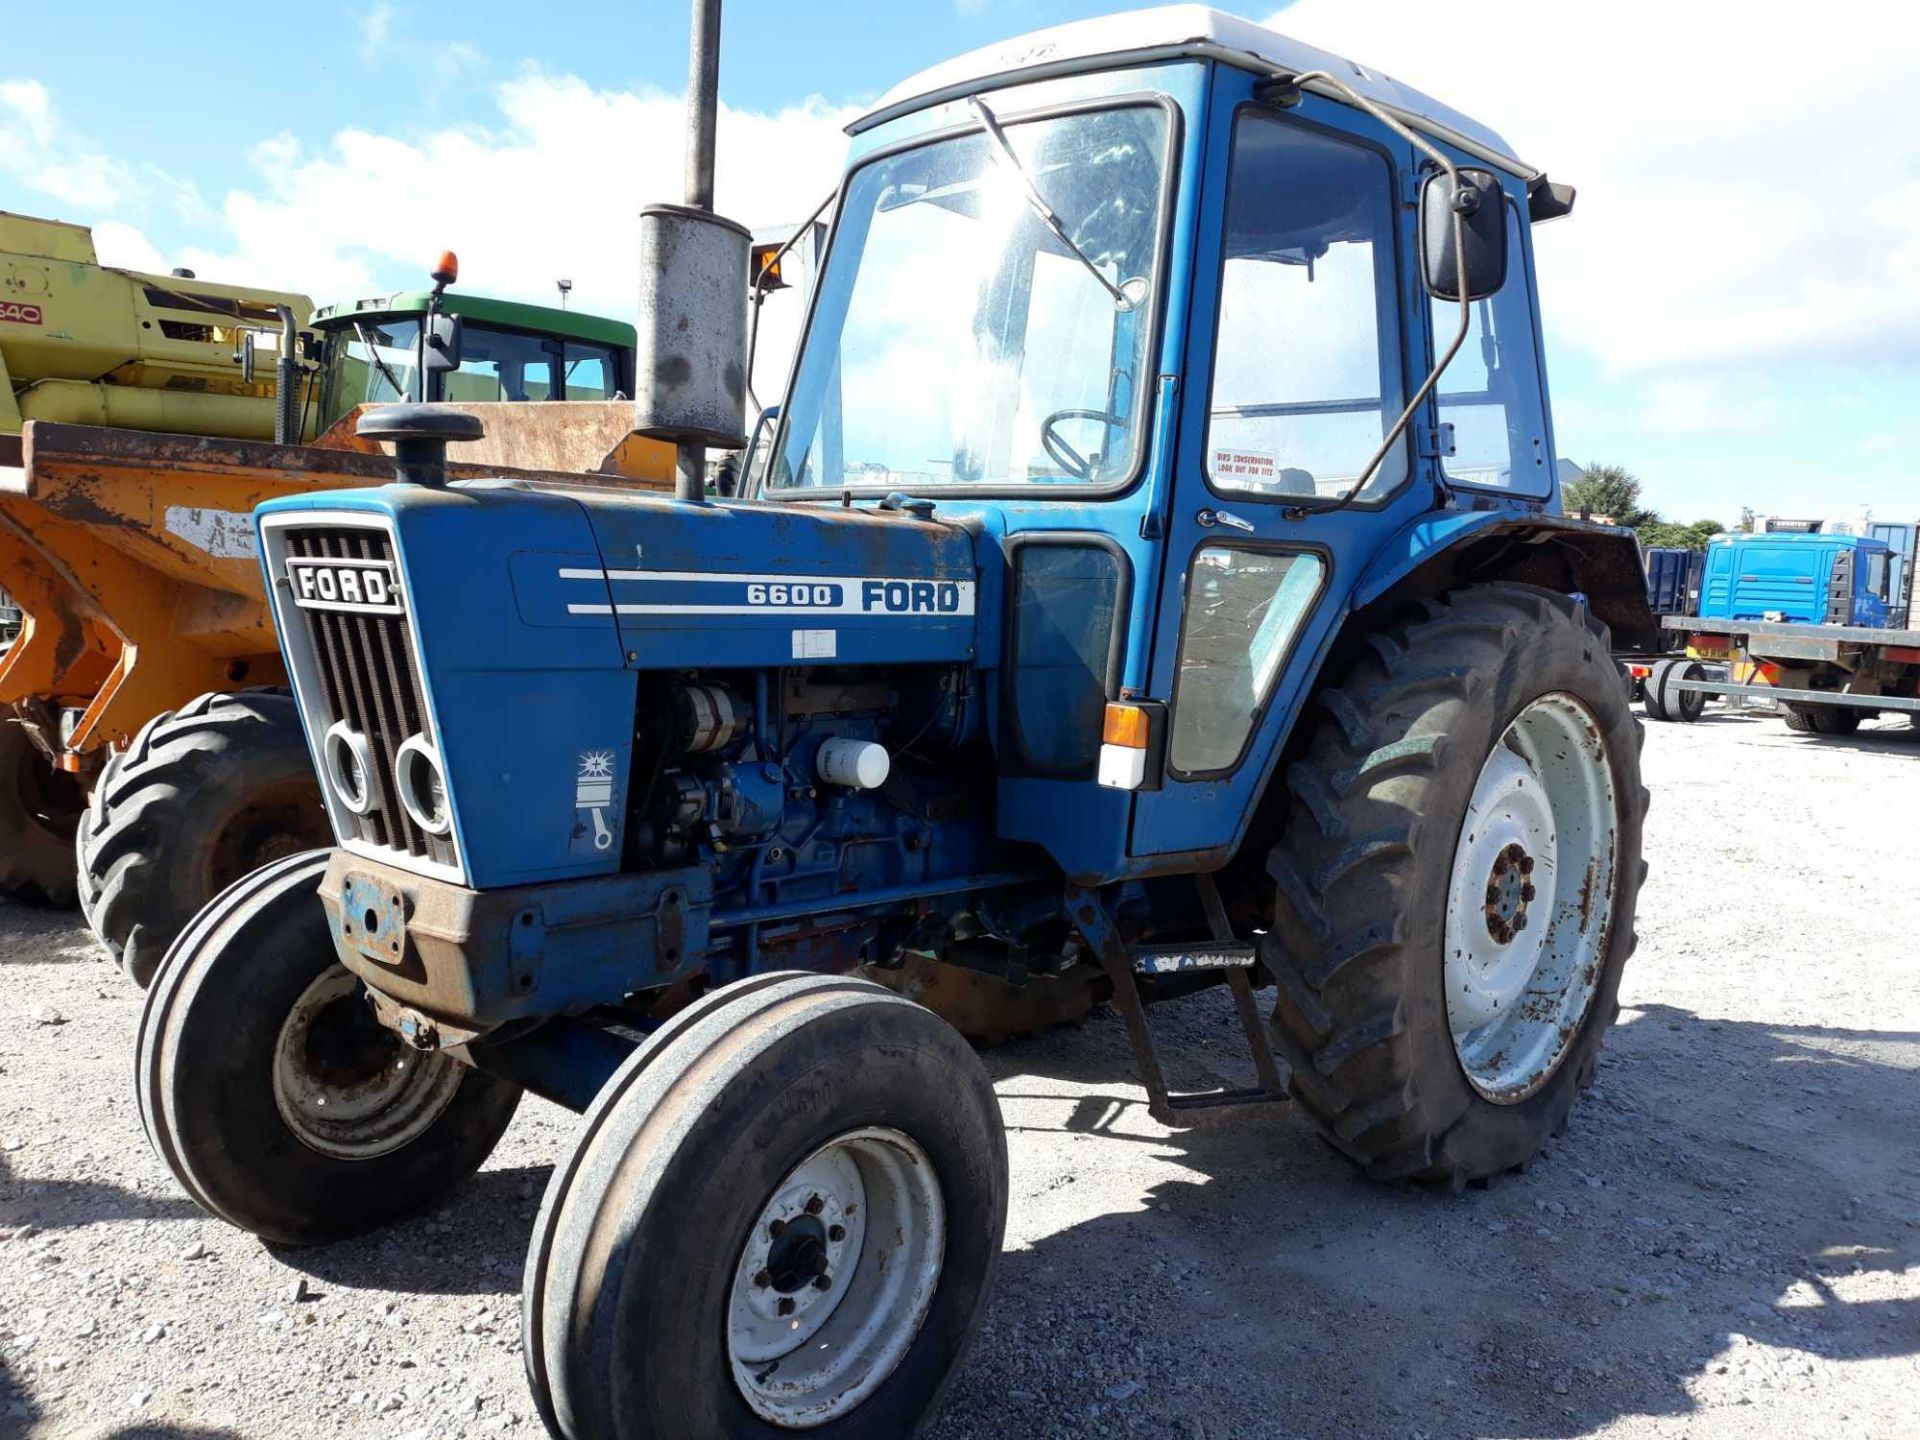 Ford Cargo 1615 - 0cc Tractor - Image 8 of 8